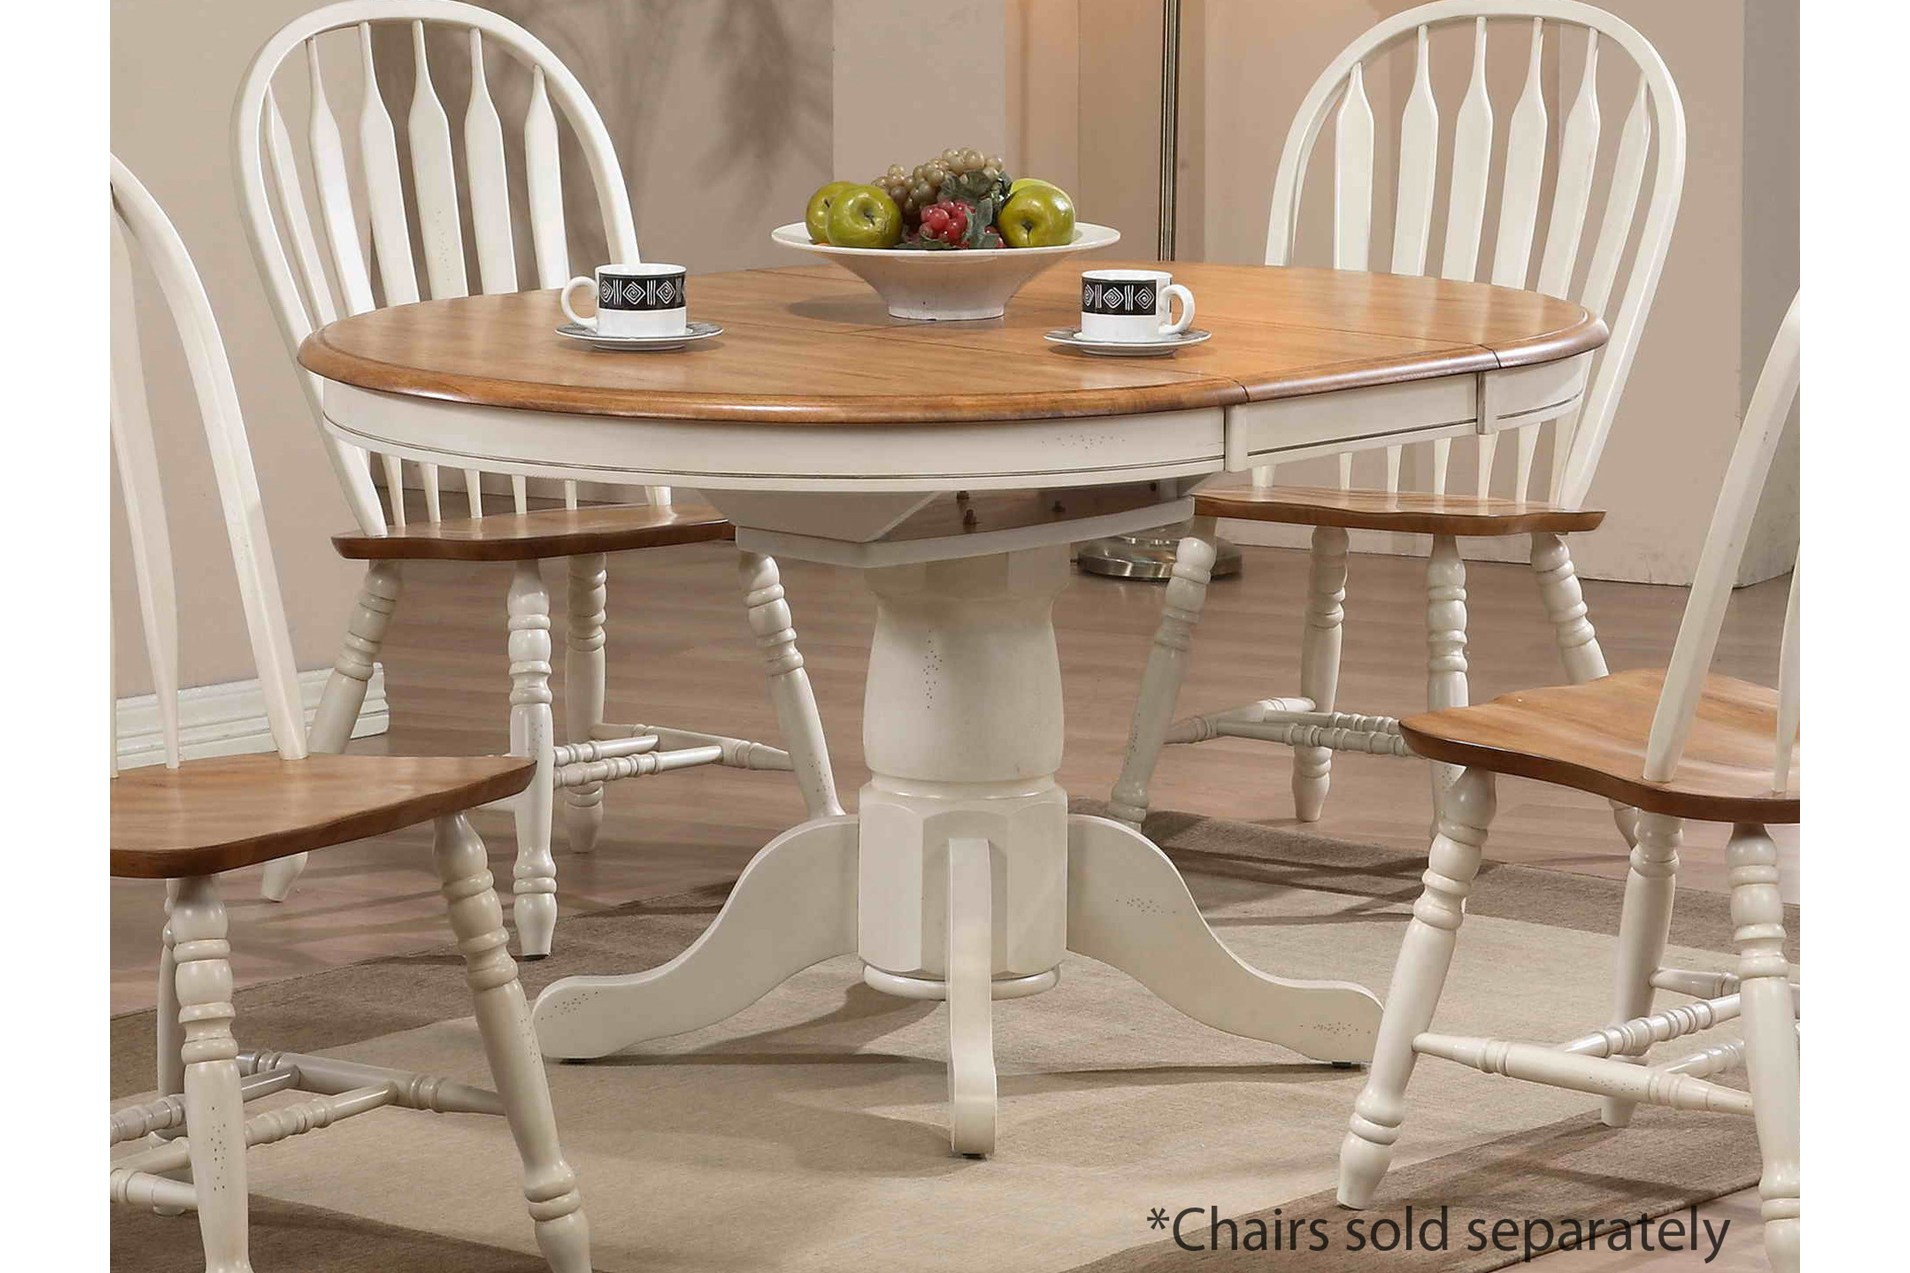 Kitchen Table Sets White
 Beautiful White Round Kitchen Table and Chairs